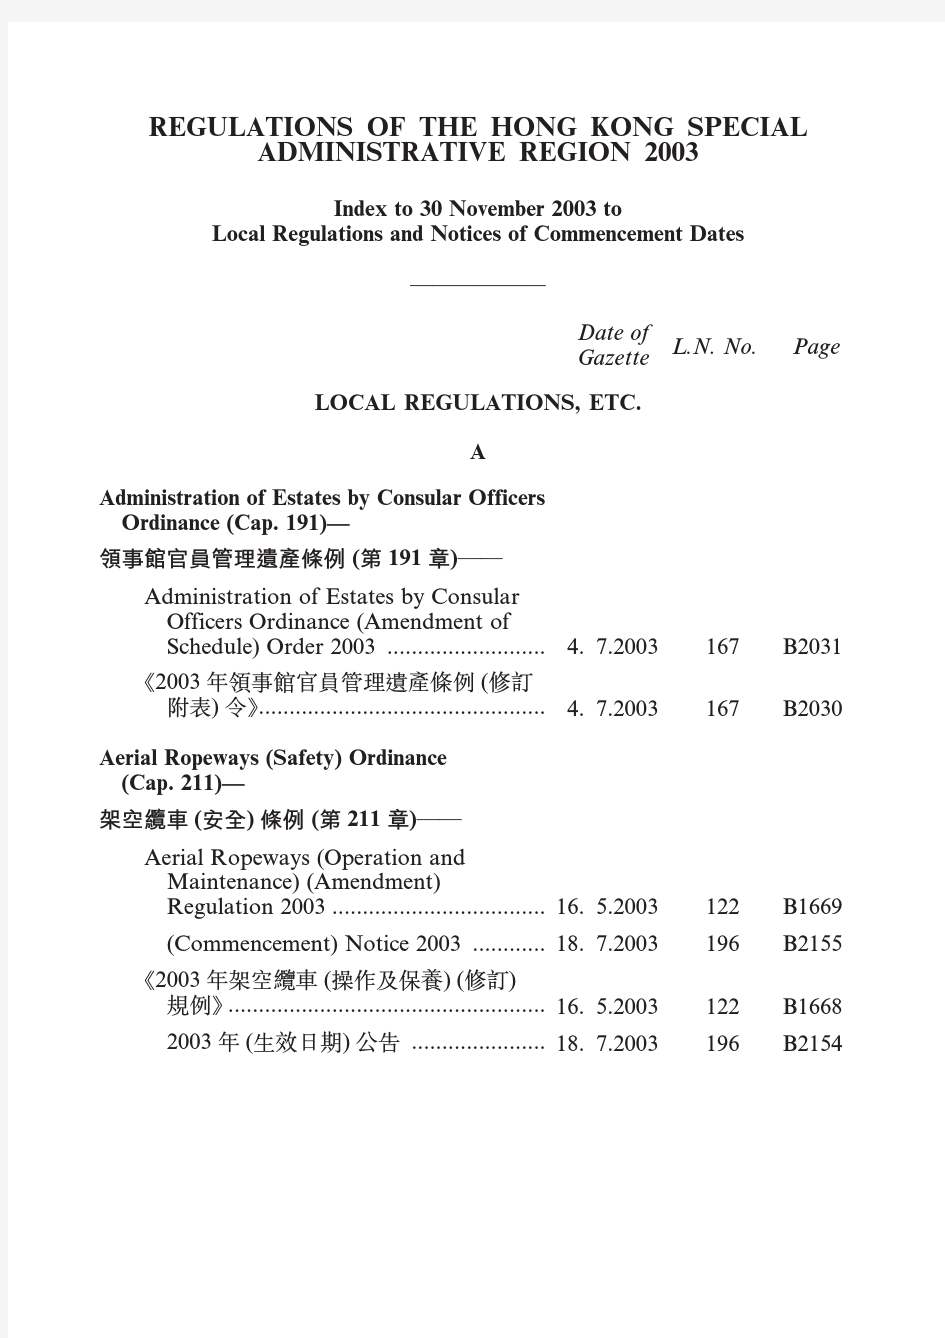 REGULATIONS OF THE HONG KONG SPECIAL ADMINISTRATIVE REGION 2003